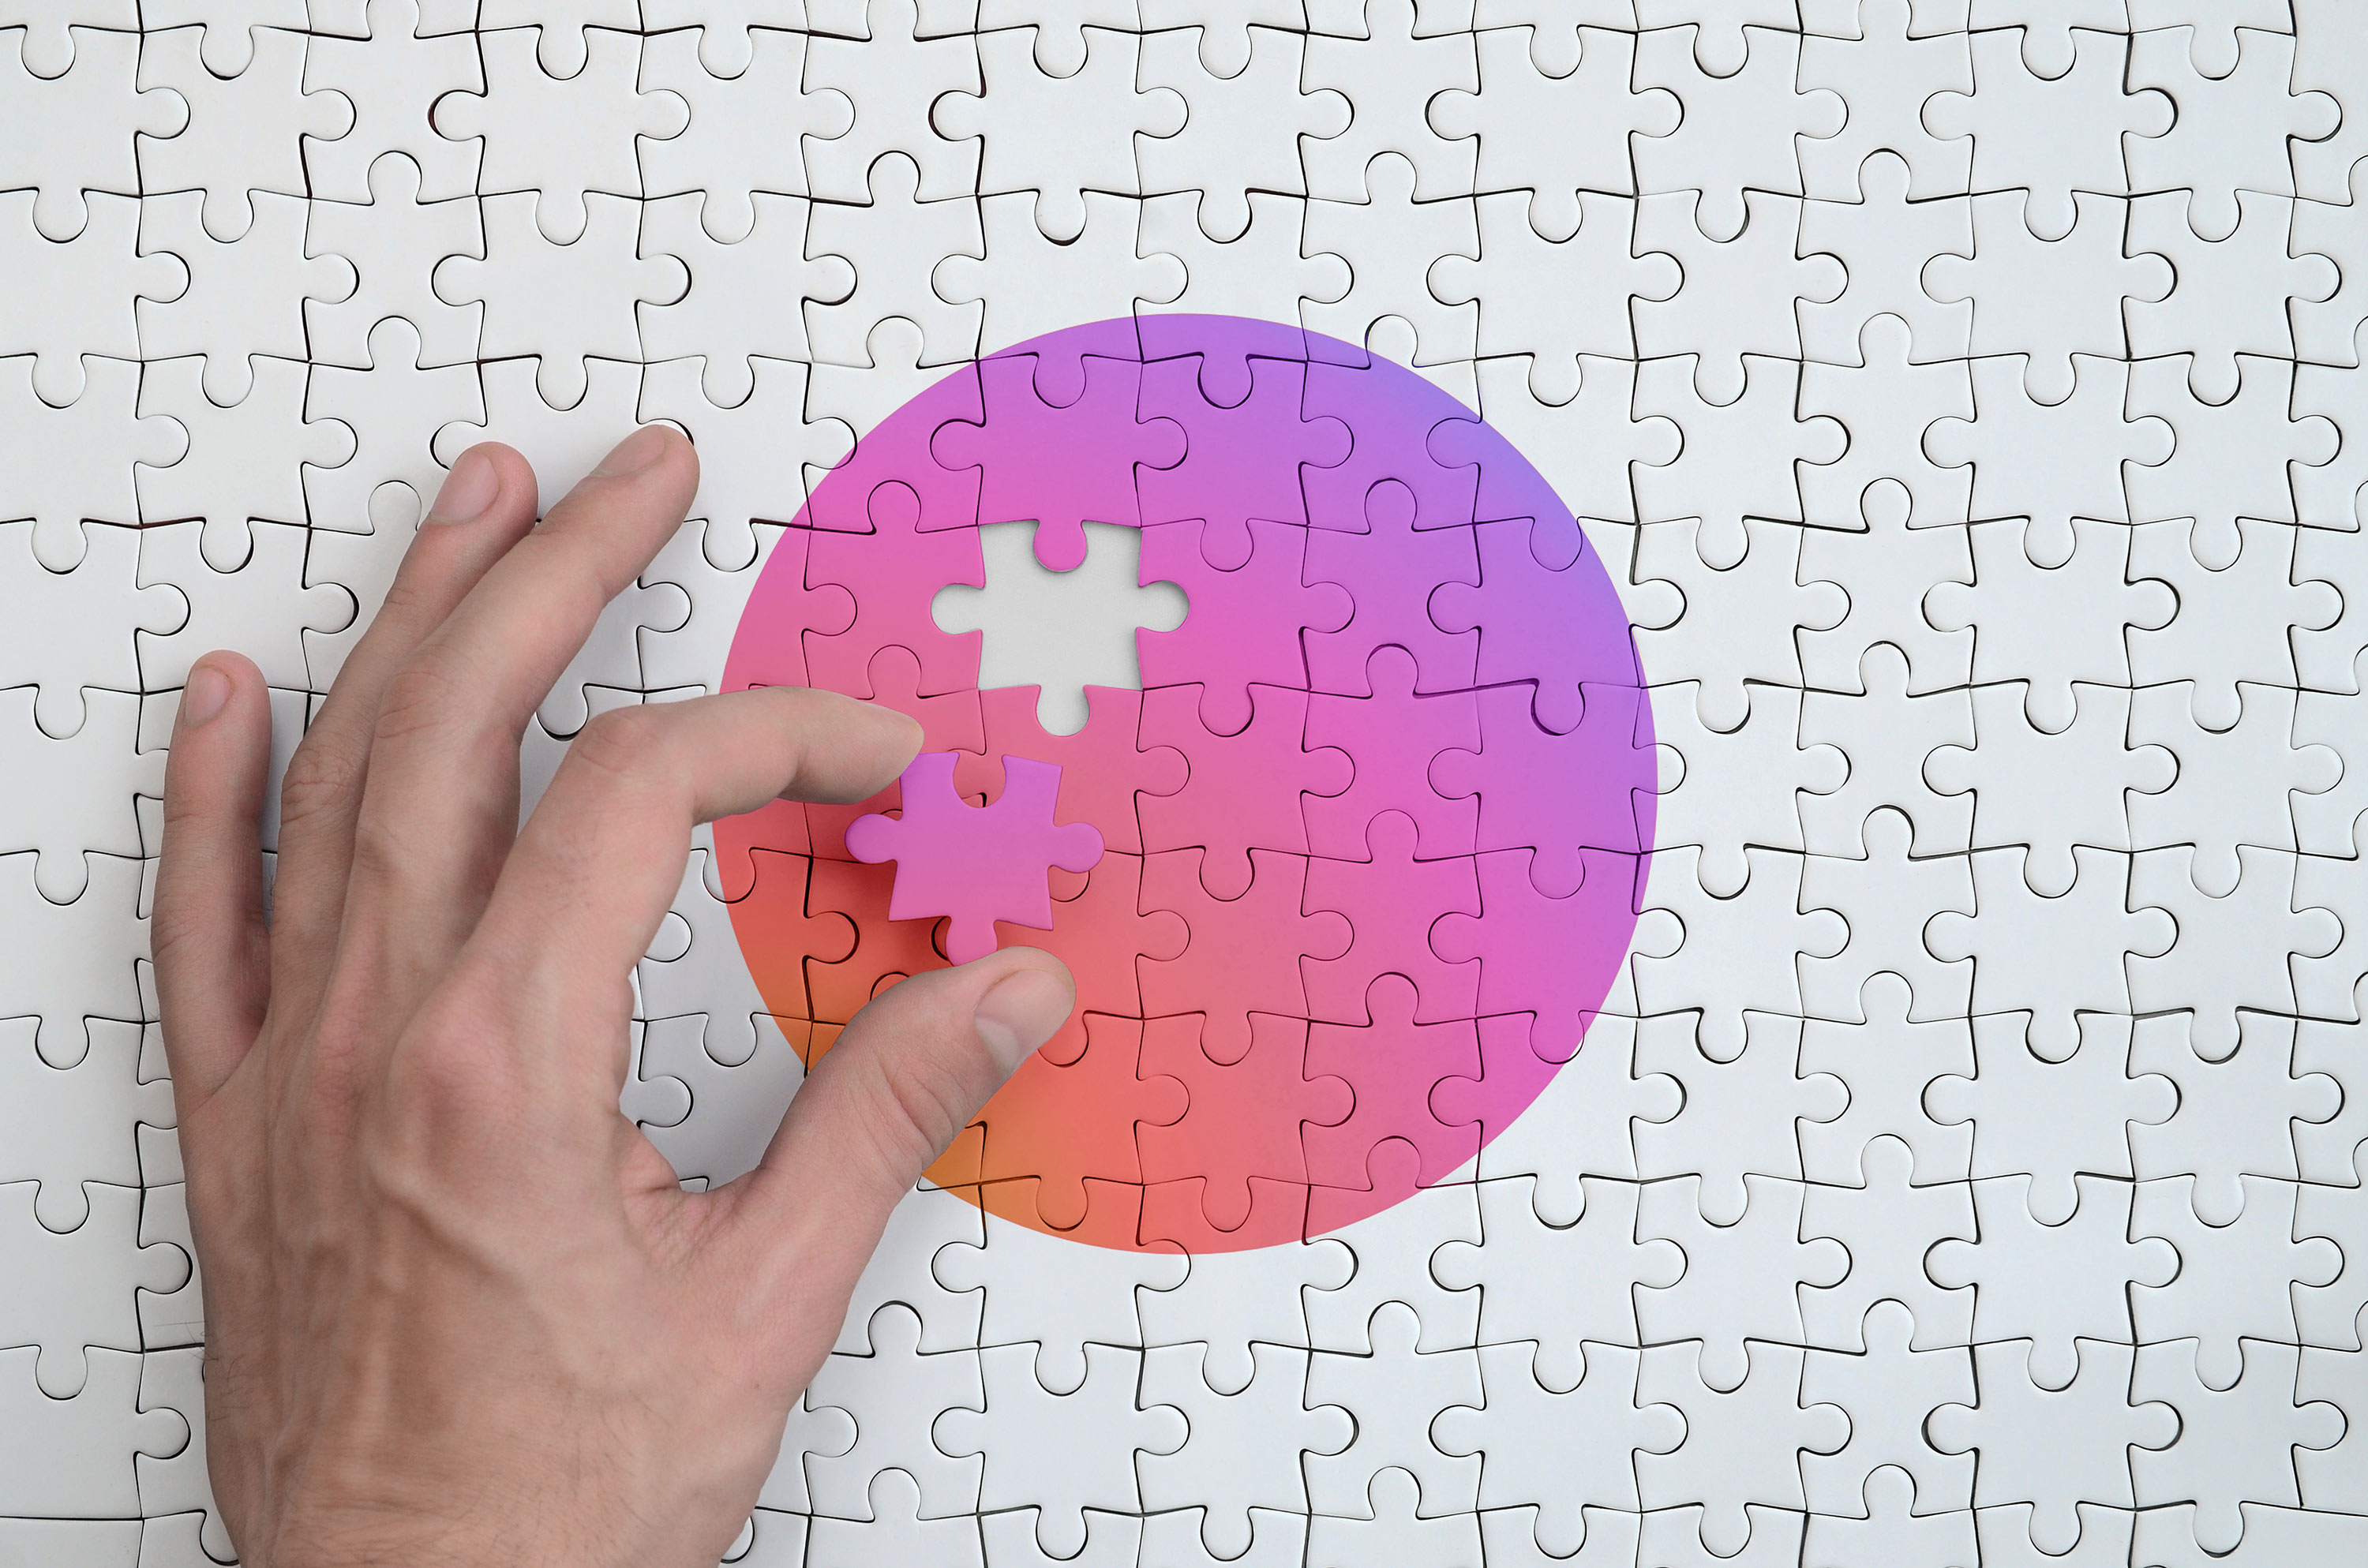 Japan flag  is depicted on a puzzle, which the man's hand completes to fold